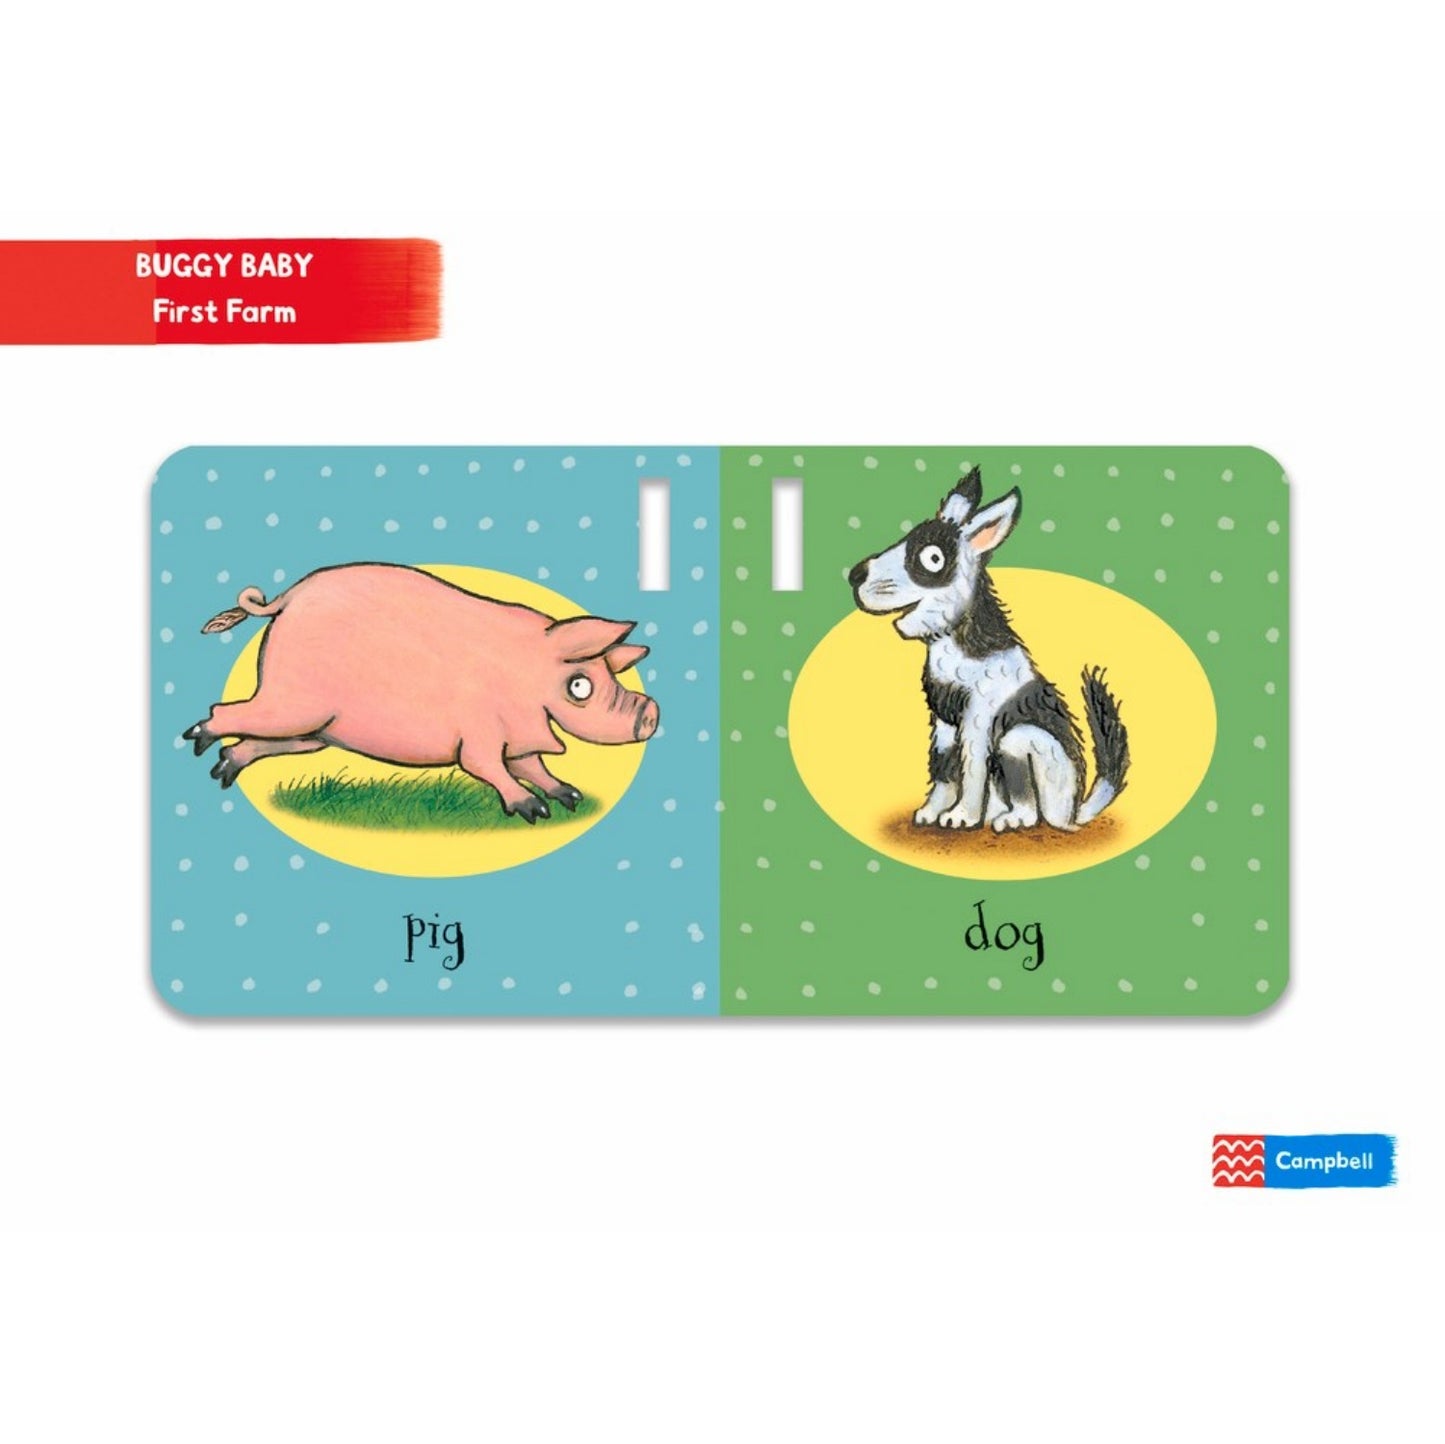 On the Farm - A Push, Pull, Slide Board Book